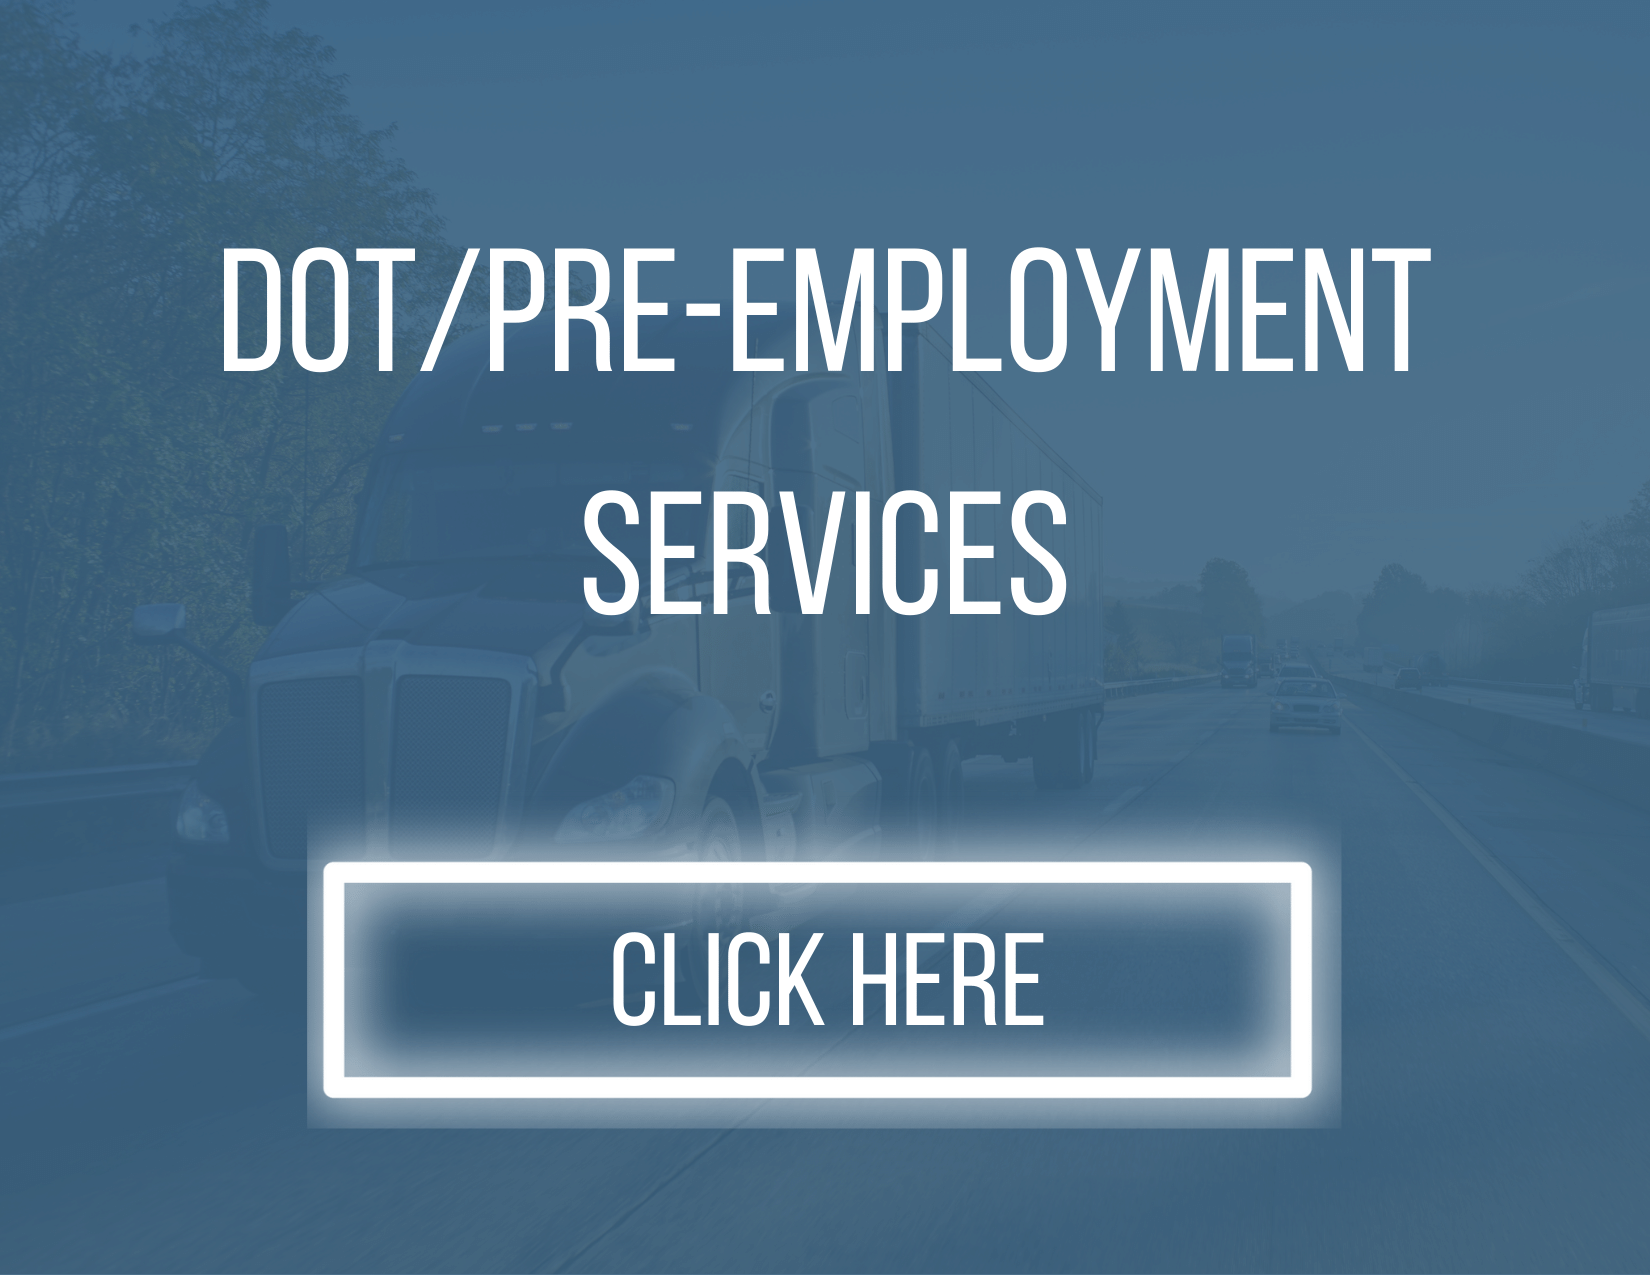 Link to DOT services page